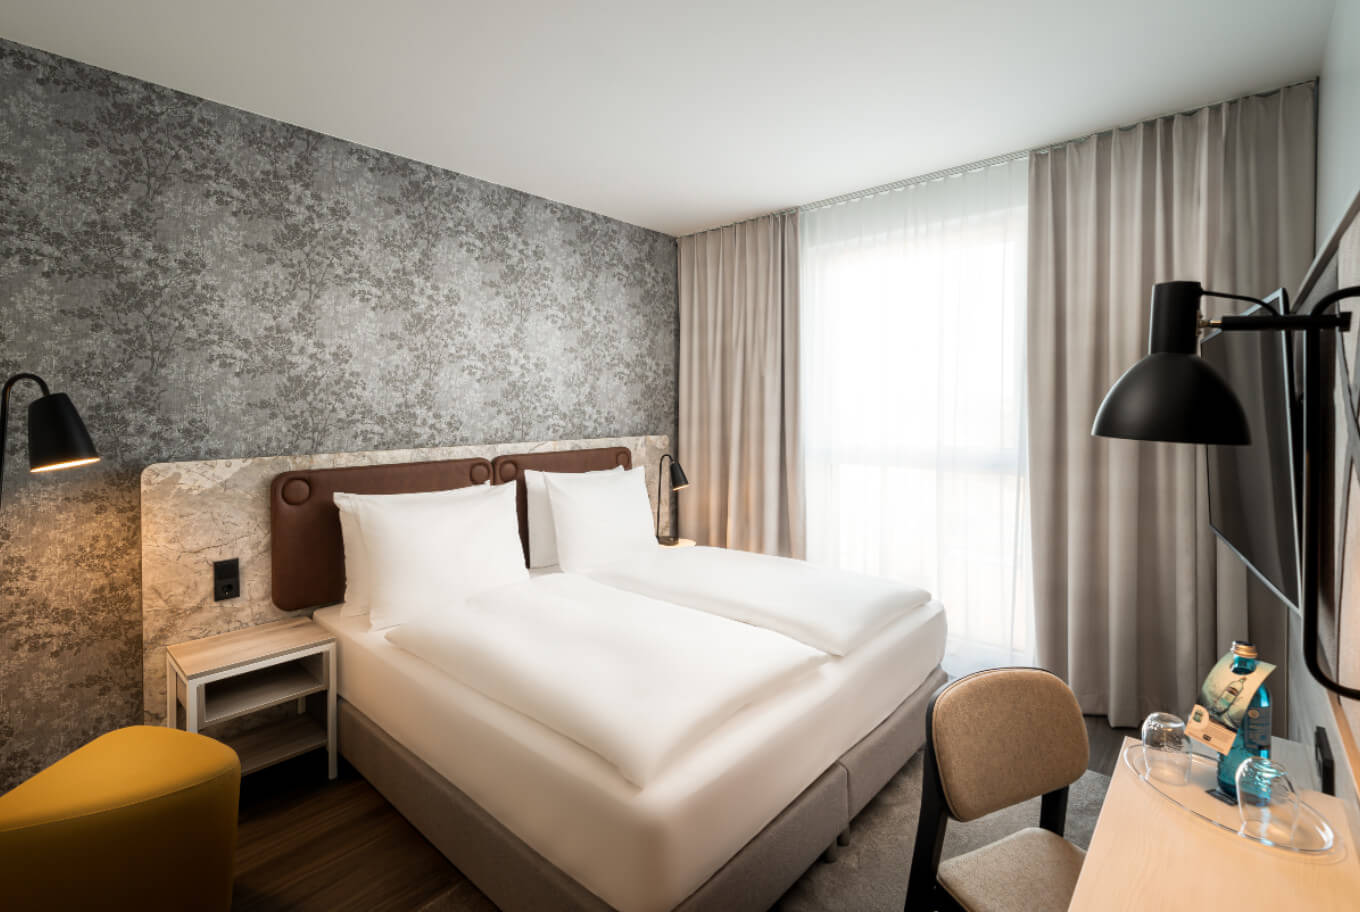 Stay in a standard double room at Arthotel ANA Amber Rostock.